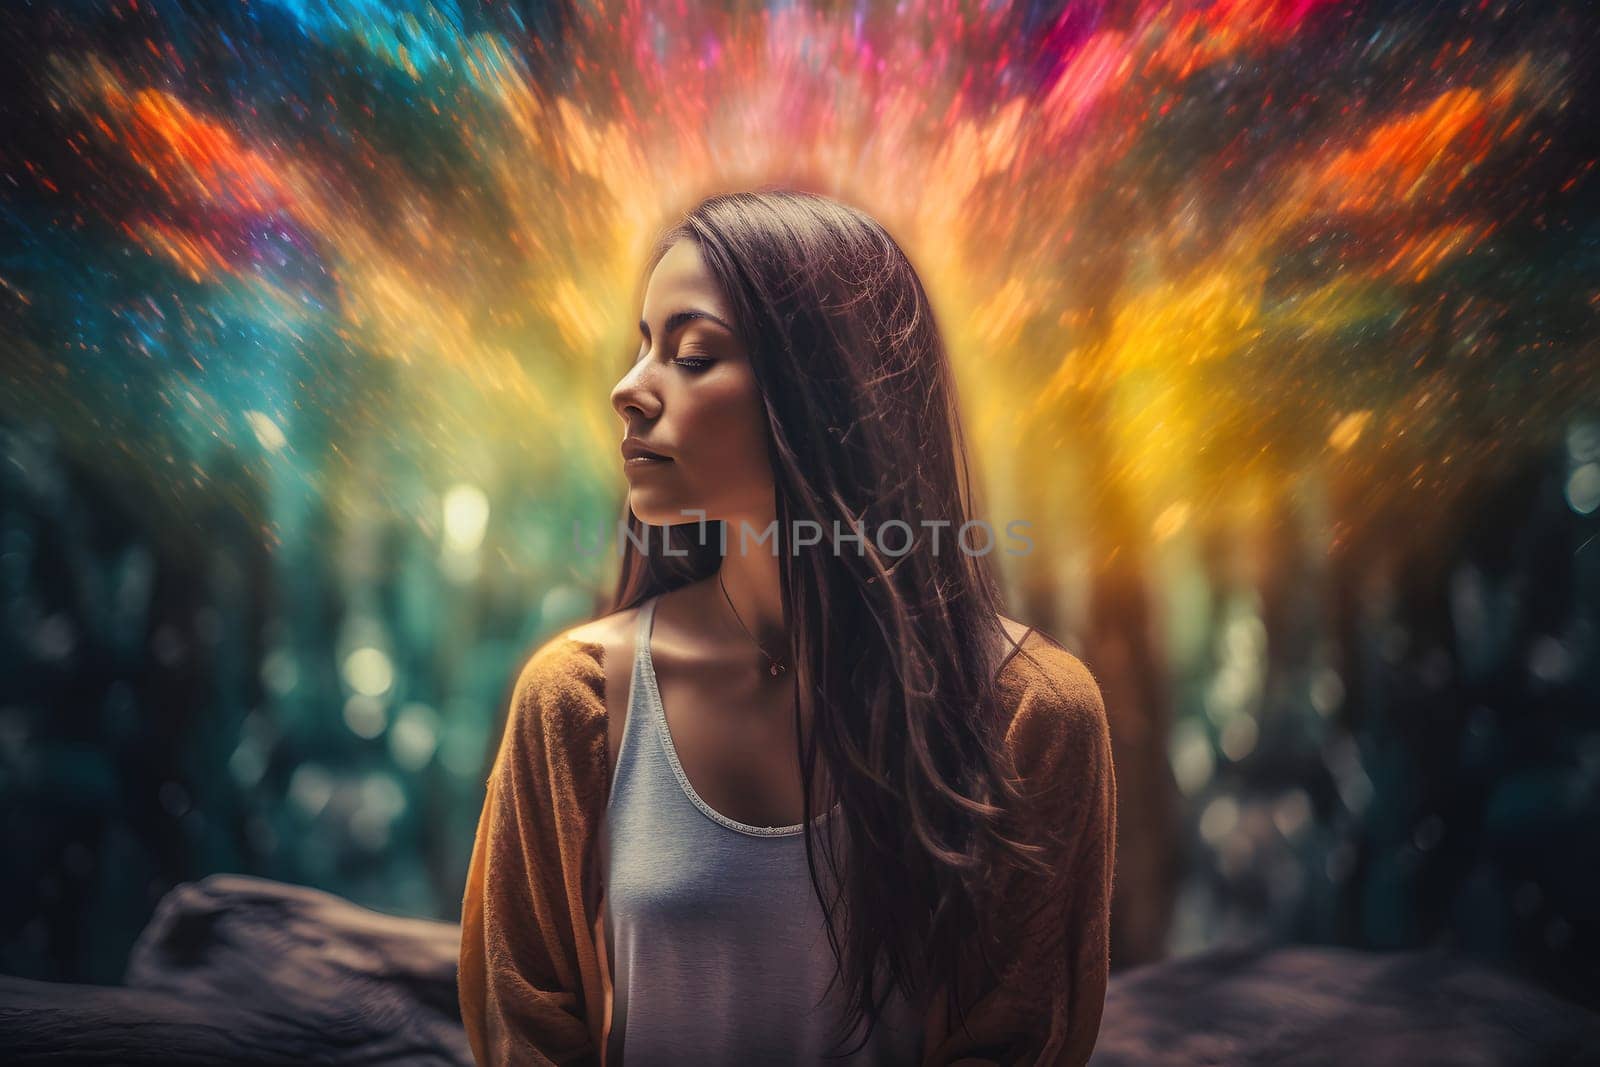 Woman meditating with colourful nature energy appearing around, neural network generated image by z1b